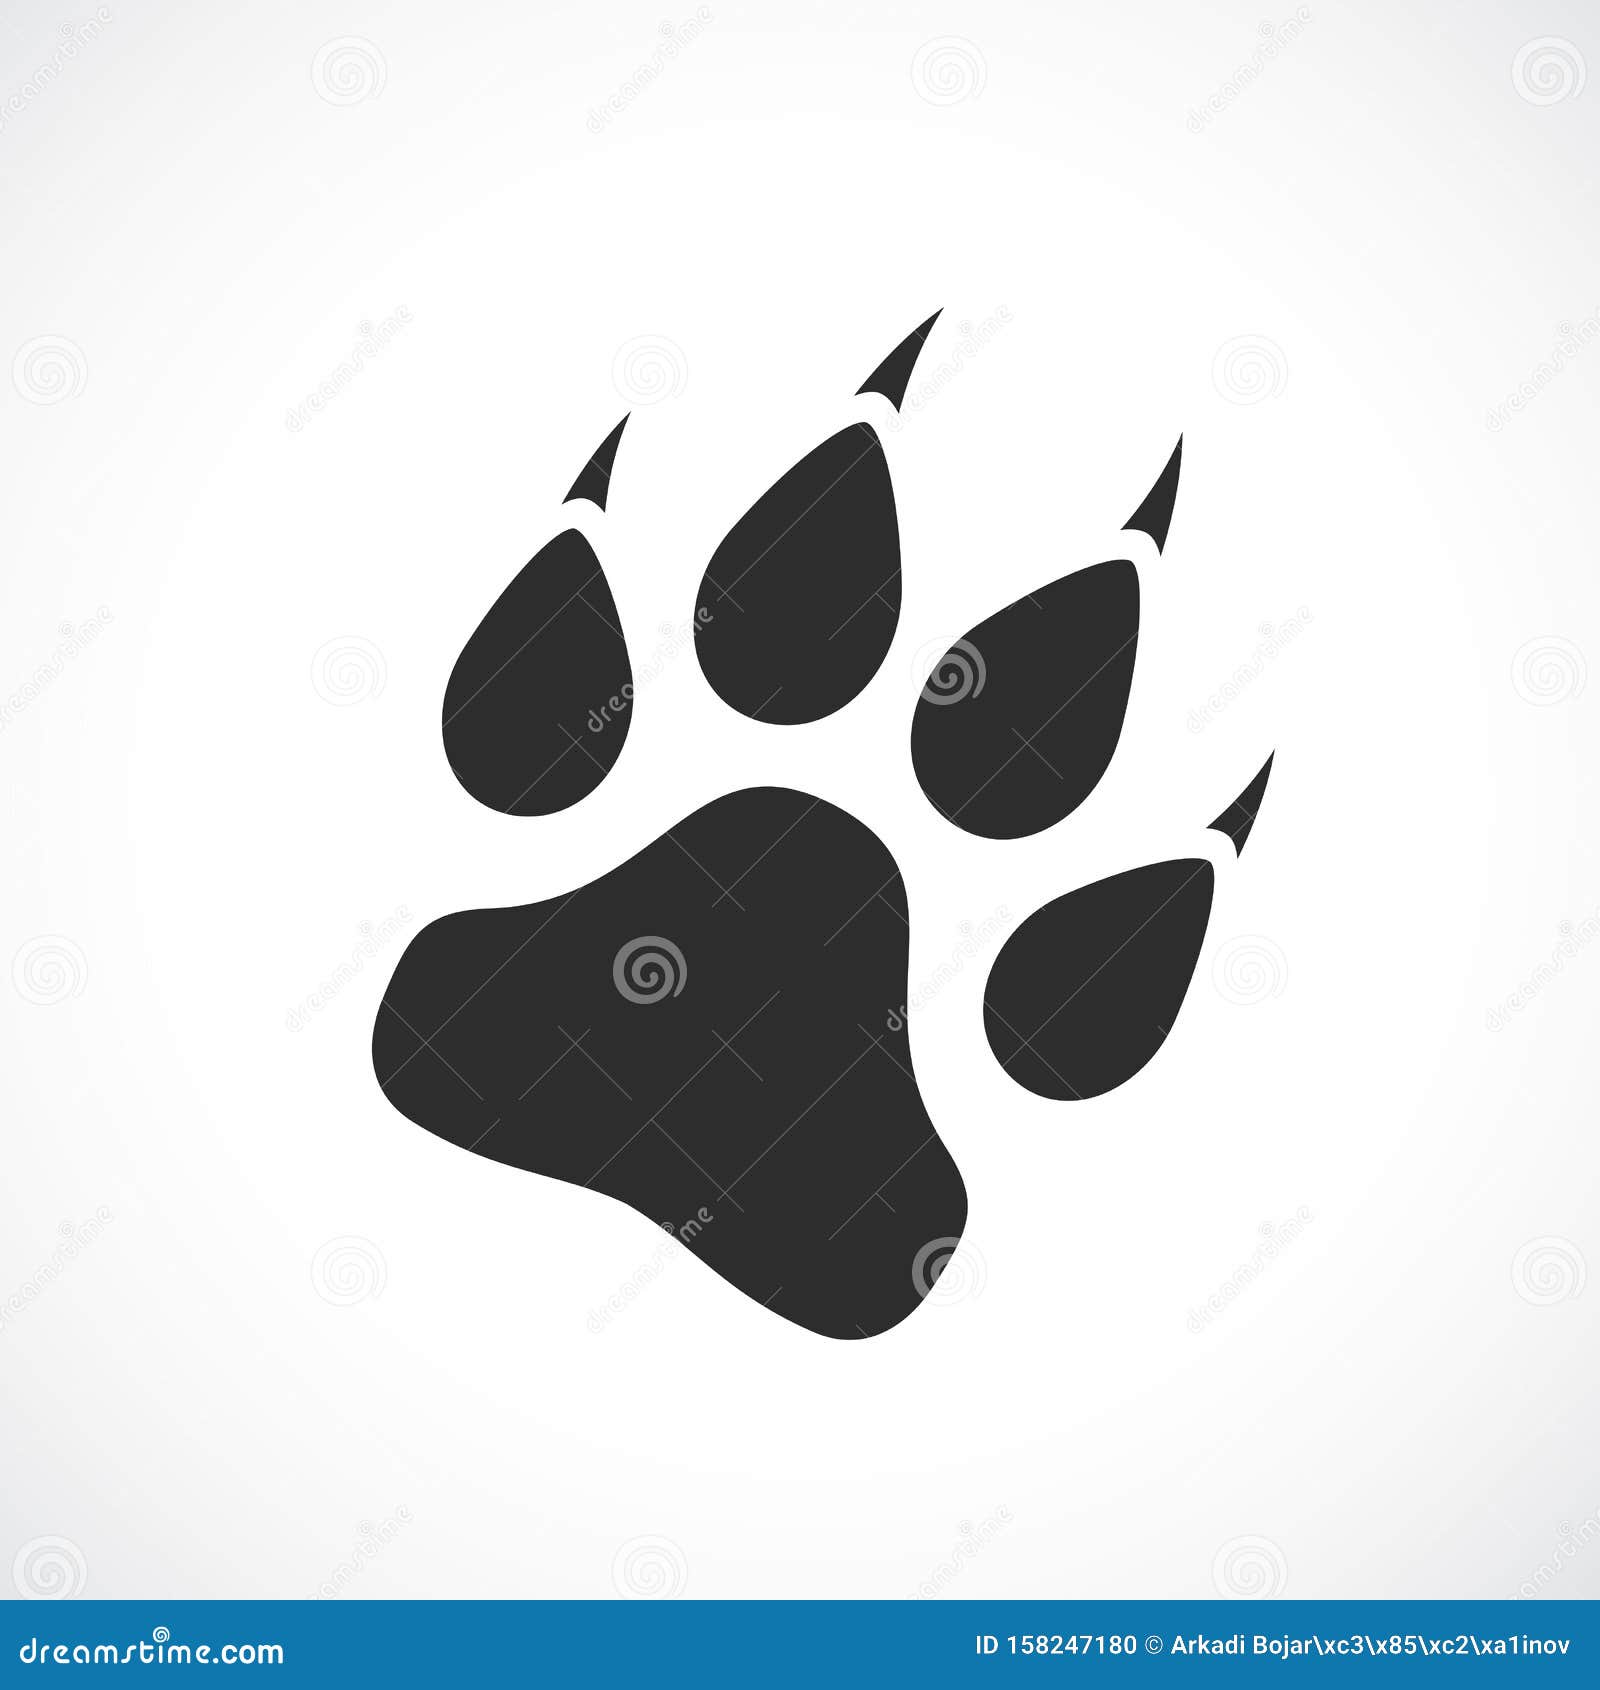 Paw silhouette vector icon stock vector. Illustration of ...